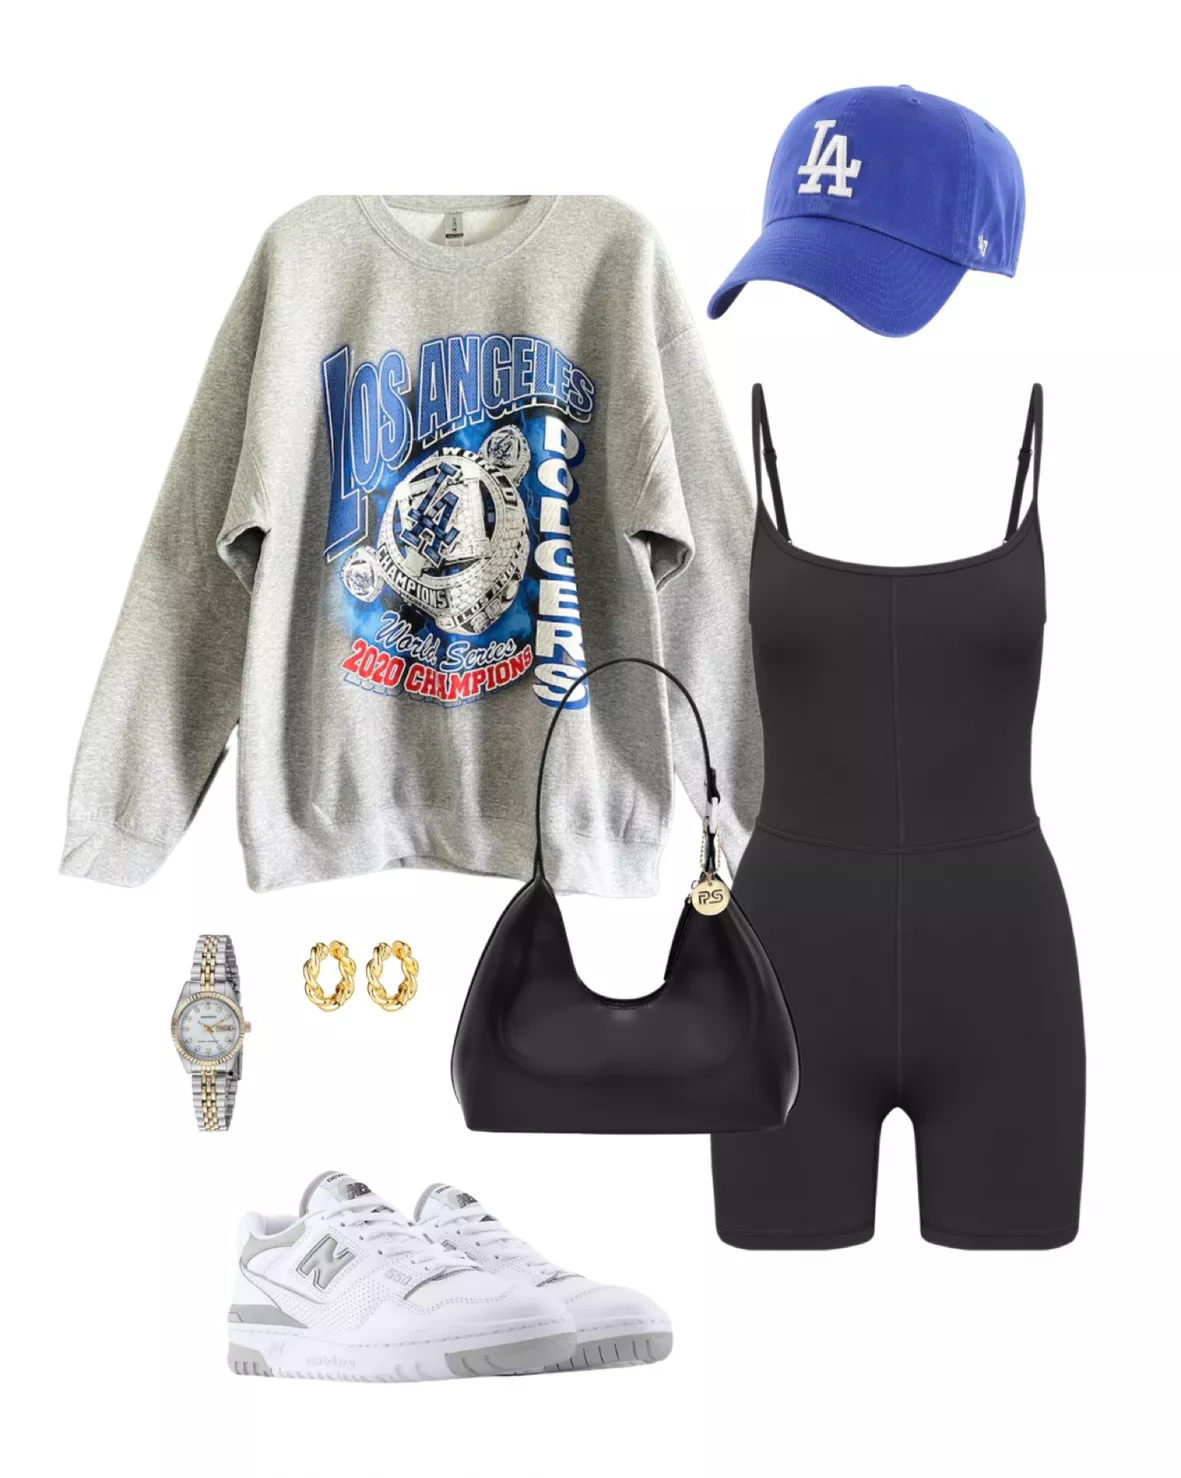 Dodger Game outfits